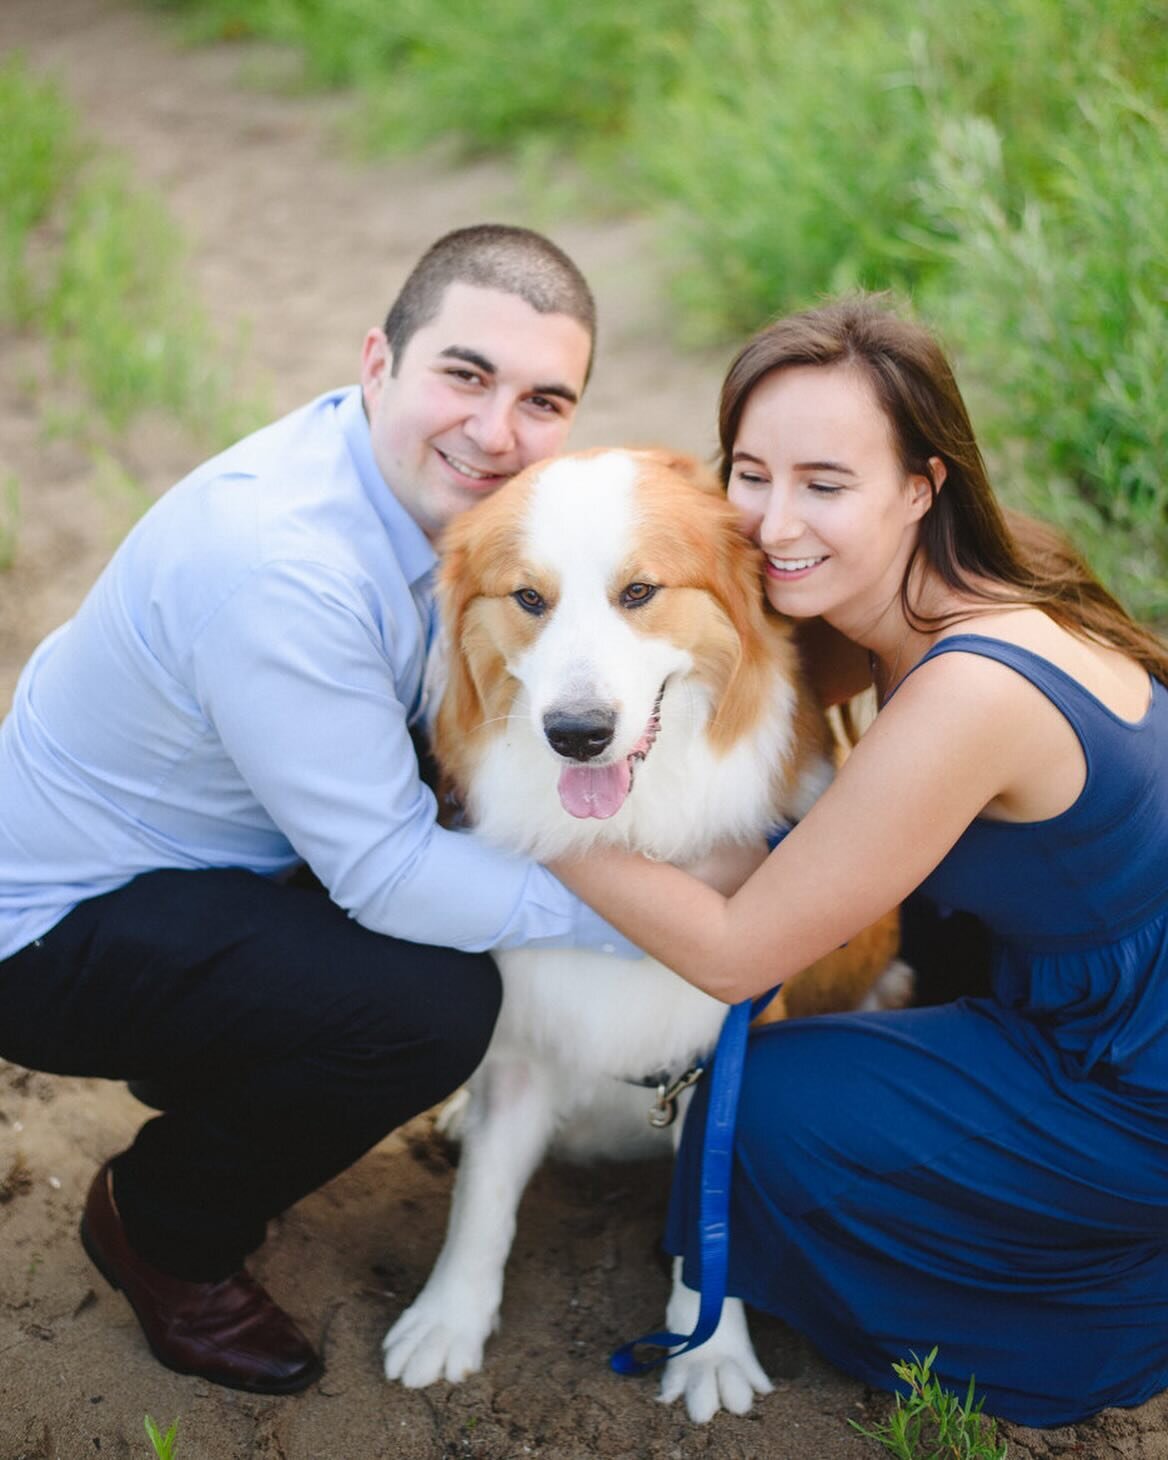 Don&rsquo;t be afraid to include your pets in your engagement session or wedding. They&rsquo;re family too!#torontoweddingphotographer #torontoengagementshoot